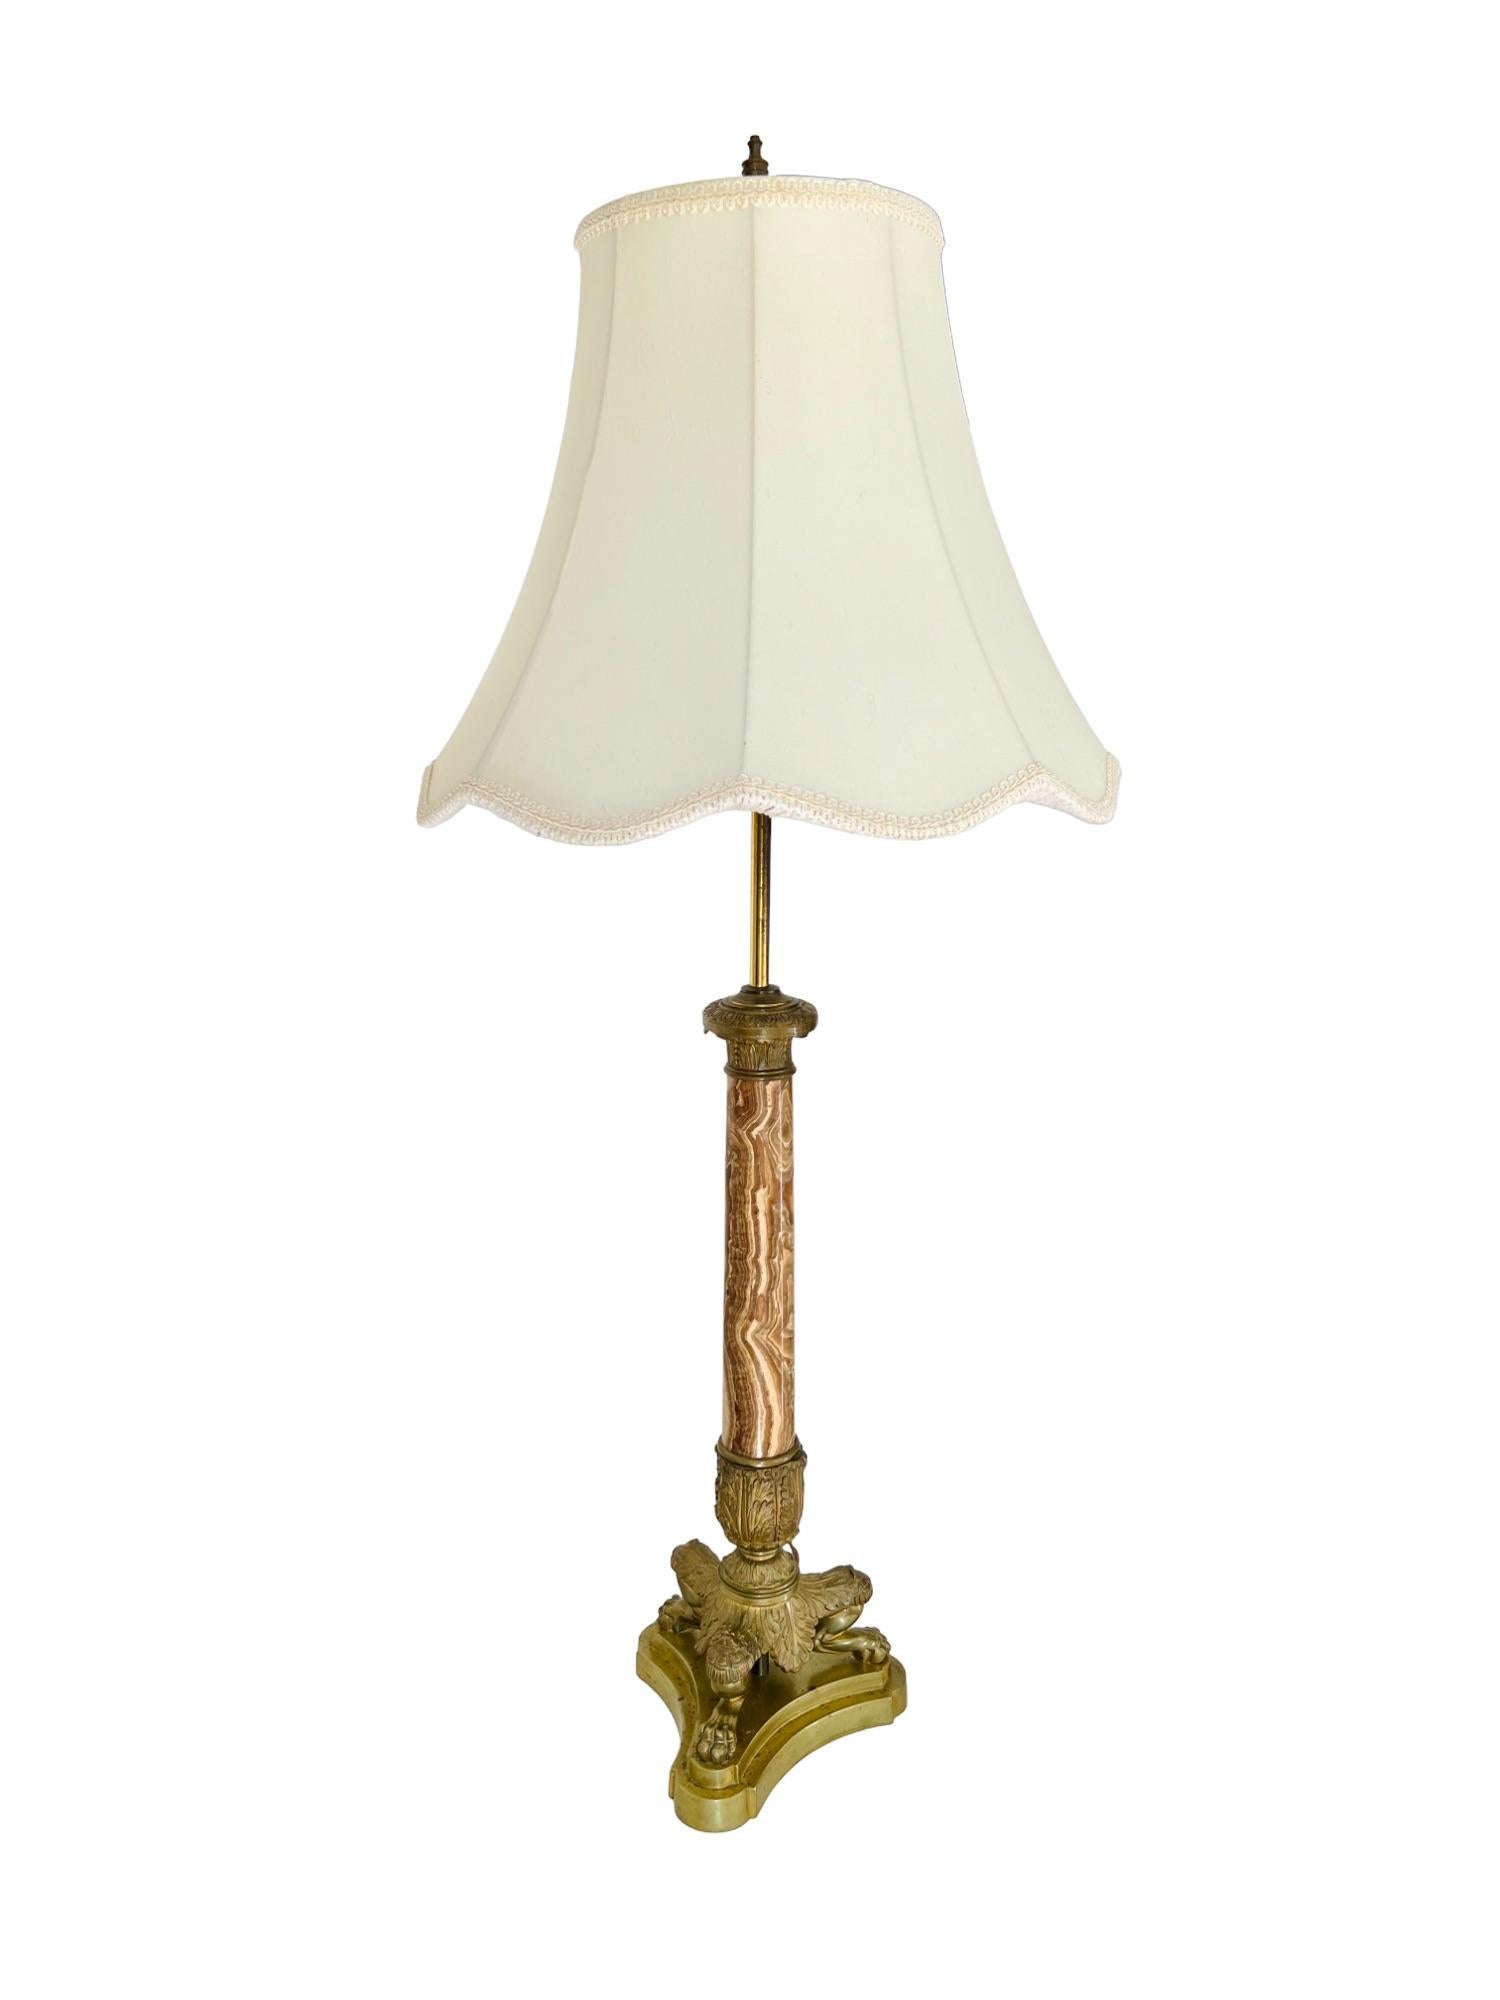 A 19th century French Empire (converted) two-light table lamp with shade. Neoclassical design featuring a tapered onyx shaft ornamented with decorative brass mounts supported by a triform lion paw footed base. Two light sockets with individual pull